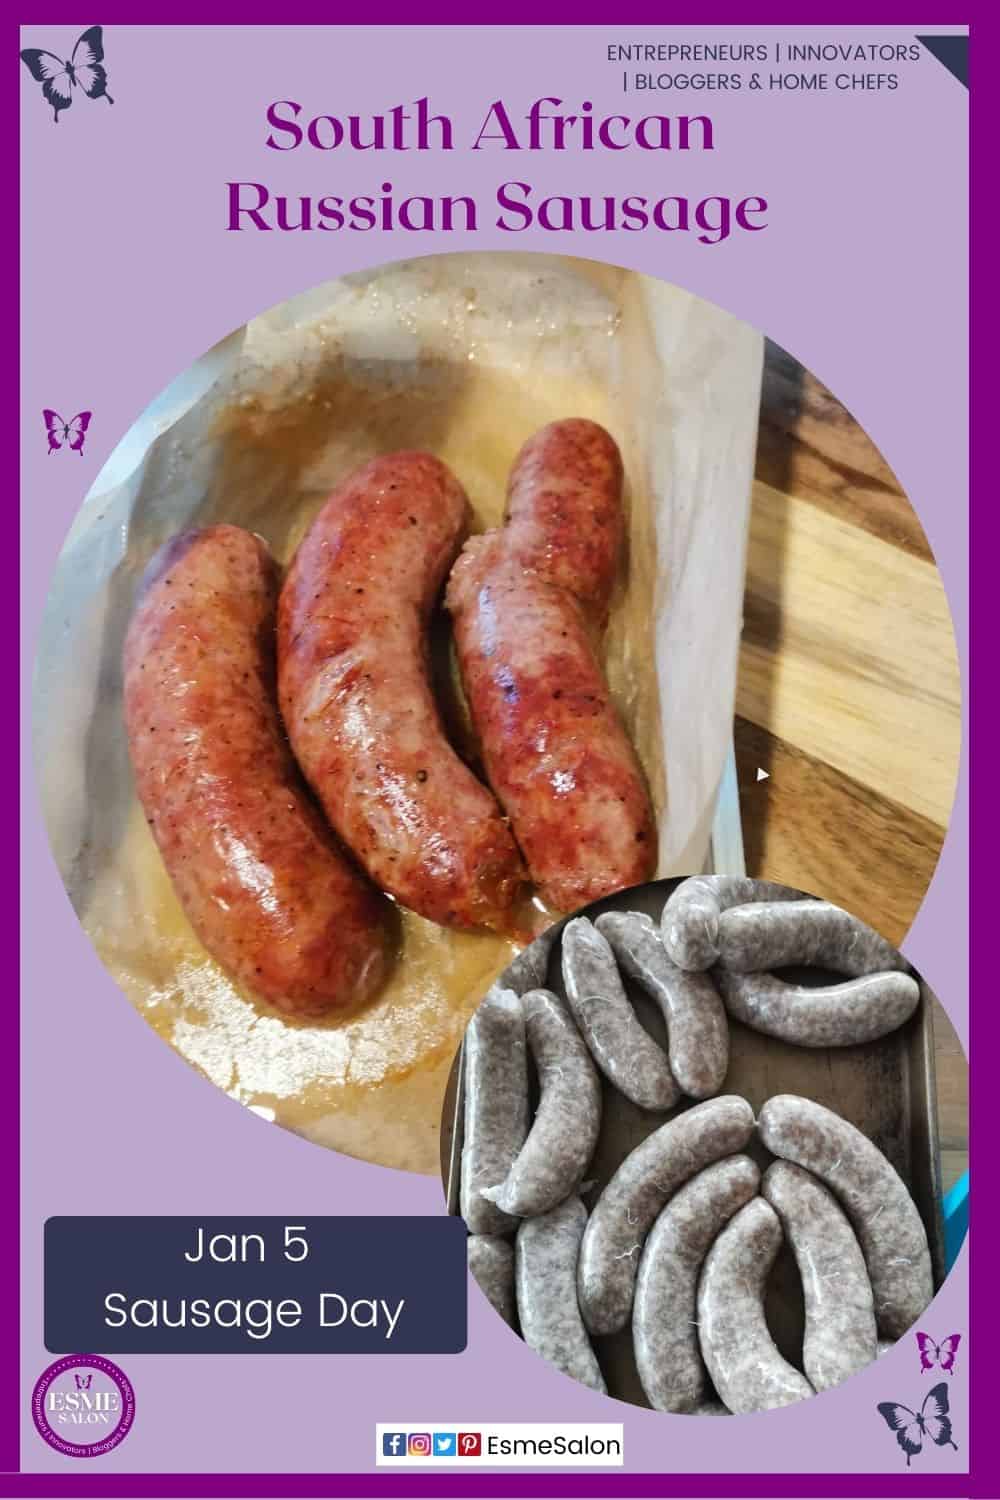 an image of South African Russian Sausages as well as links of raw sausage before baking